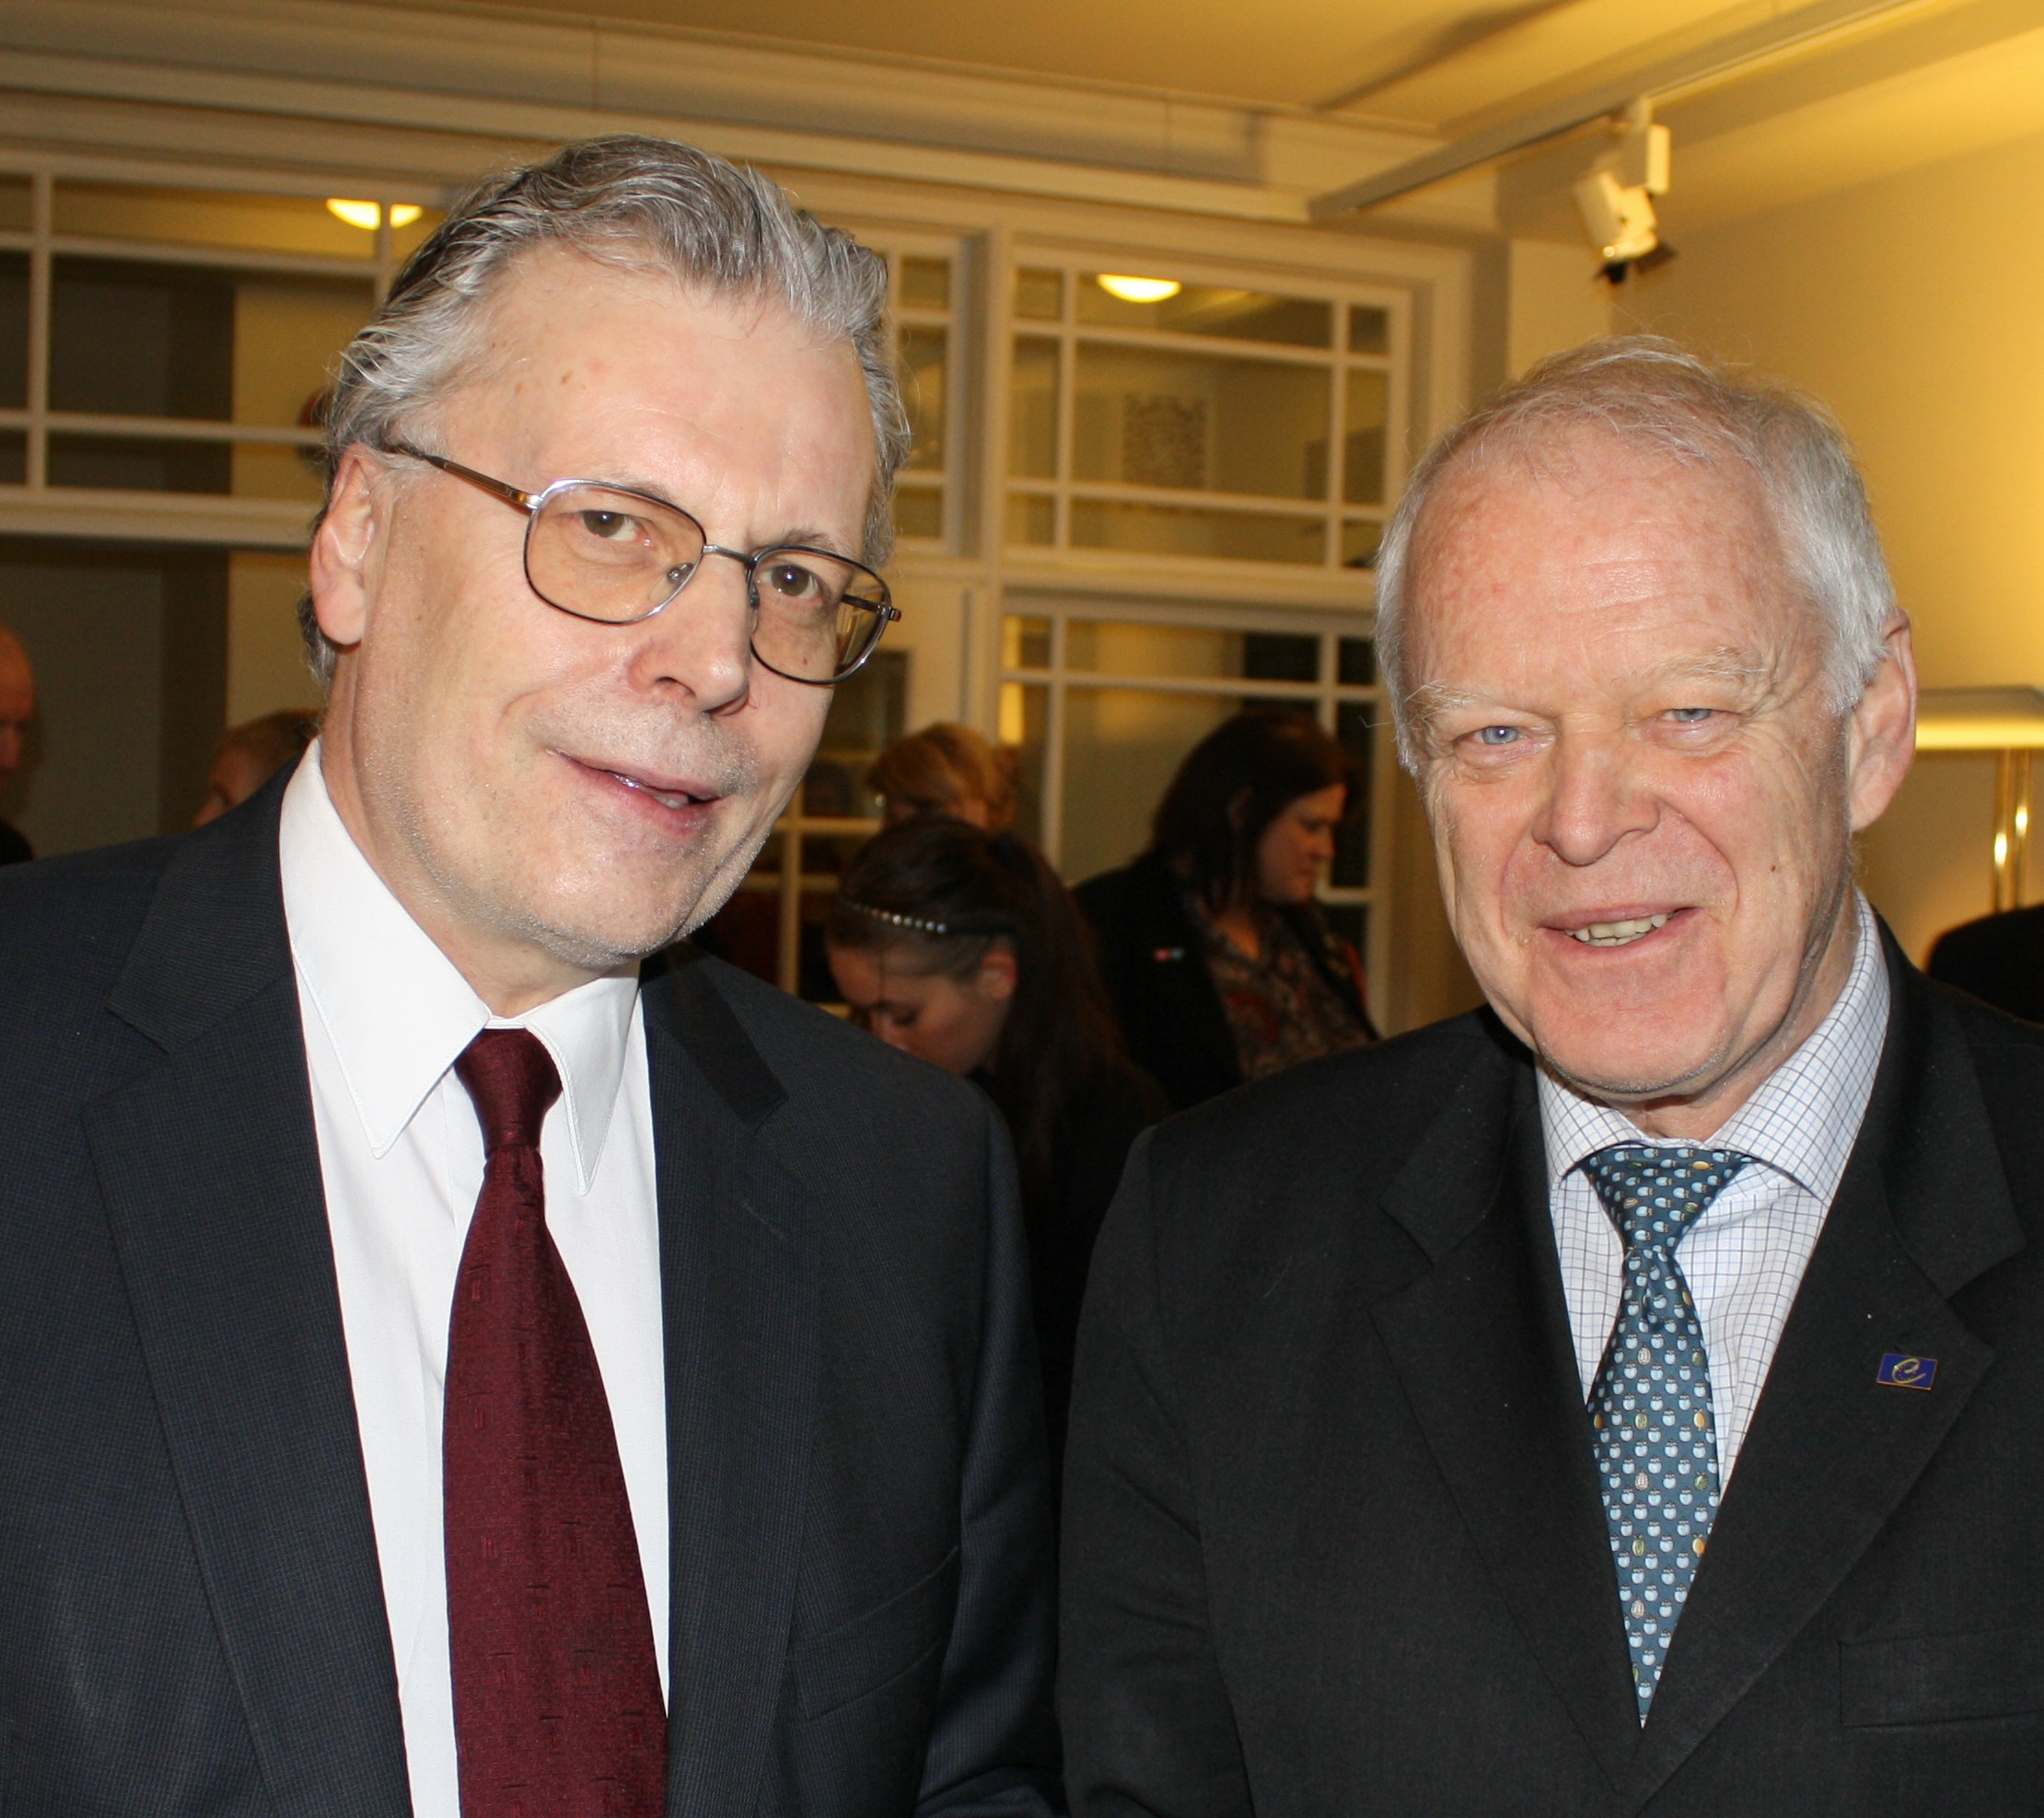 Ögmundur Jónasson, Minister of the Interior (left), and Thomas Hammarberg, Commissioner for Human Rights for the Council of Europe.